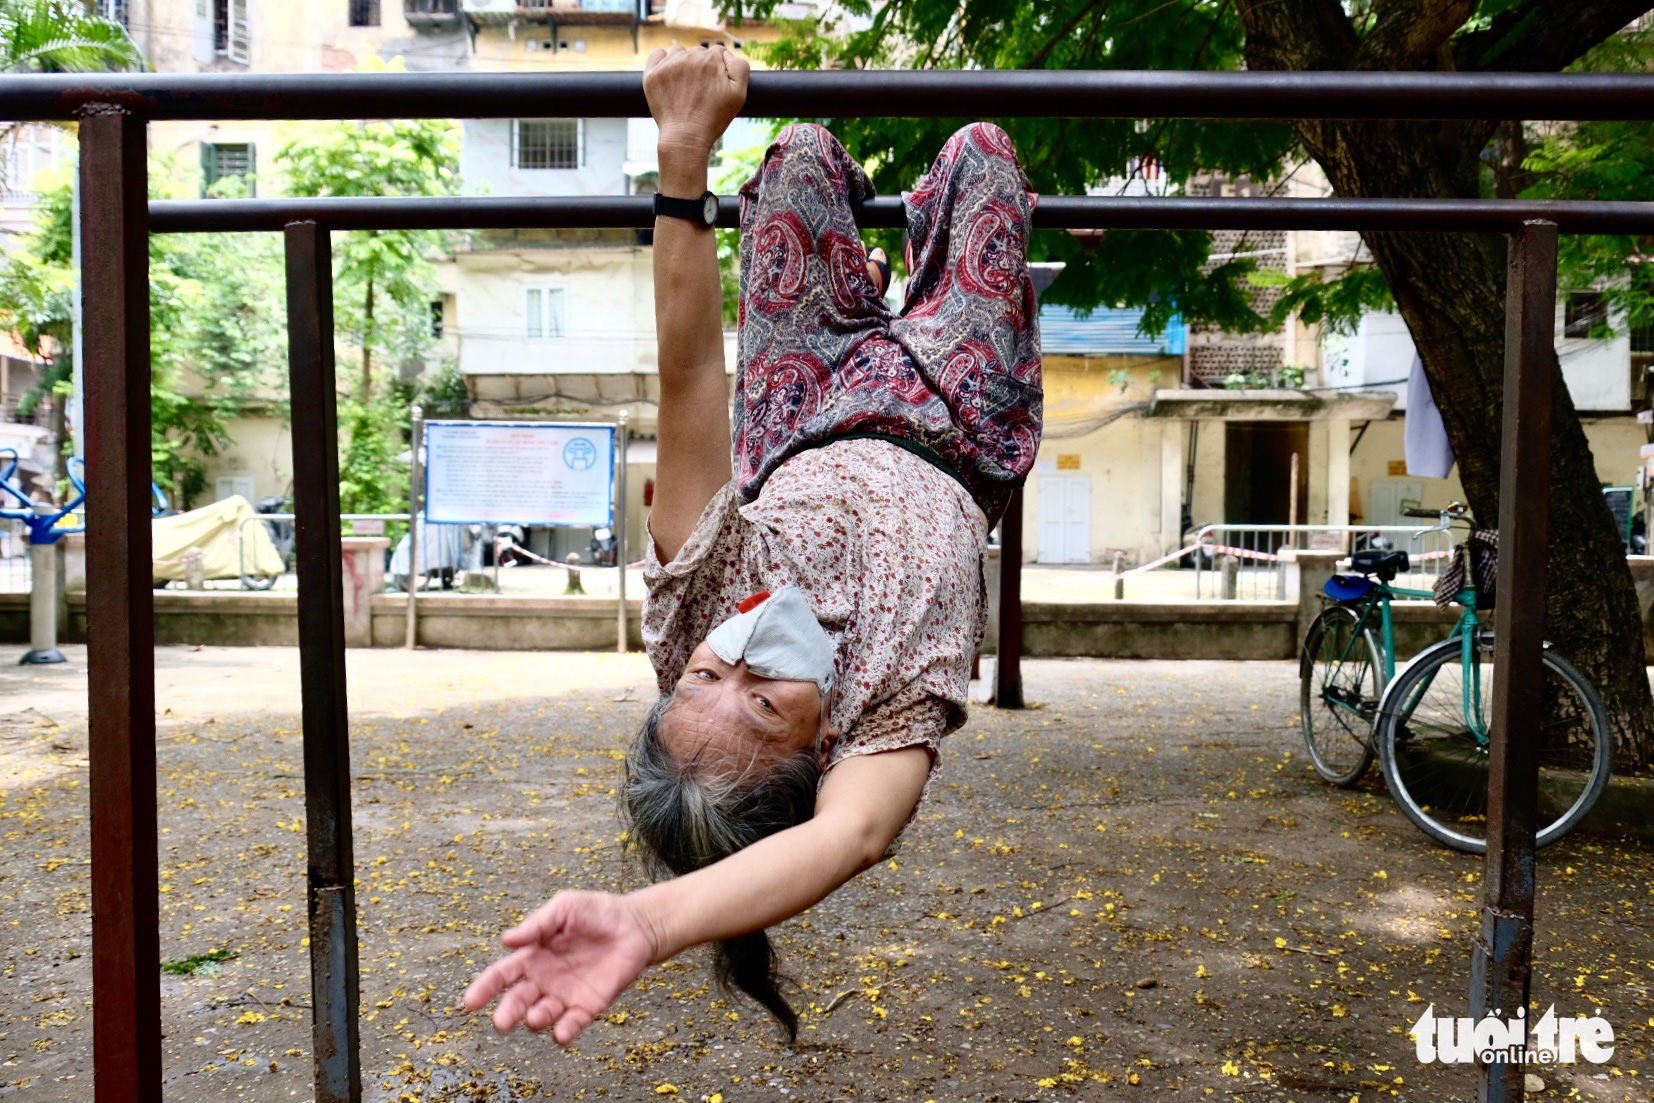 Le Thi Phong performs upside-down crunches on a bar at the E Yard on Van Chuong Street in Dong Da District, Hanoi. Photo: Nguyen Bao / Tuoi Tre